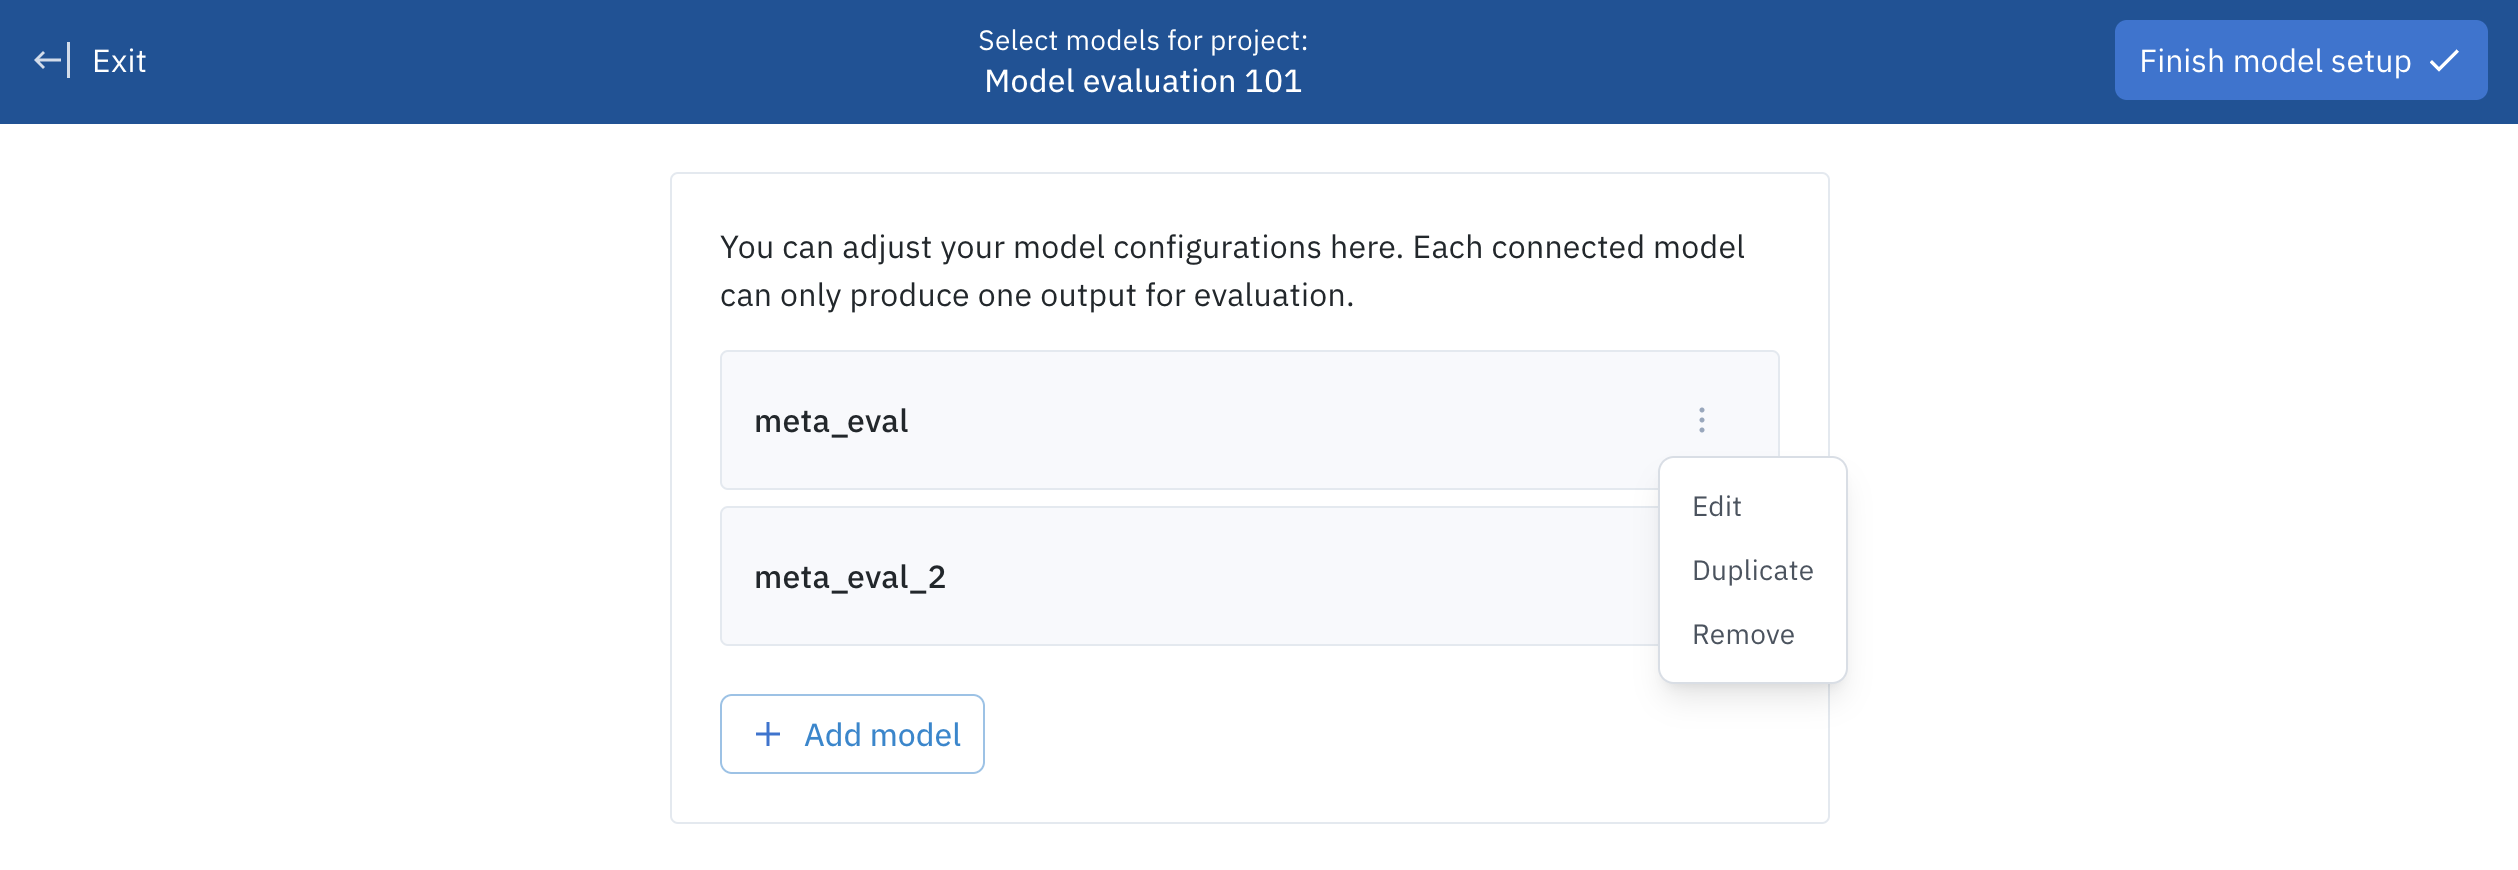 Use the ellipsis to Edit, Duplicate, or Remove a model selection 